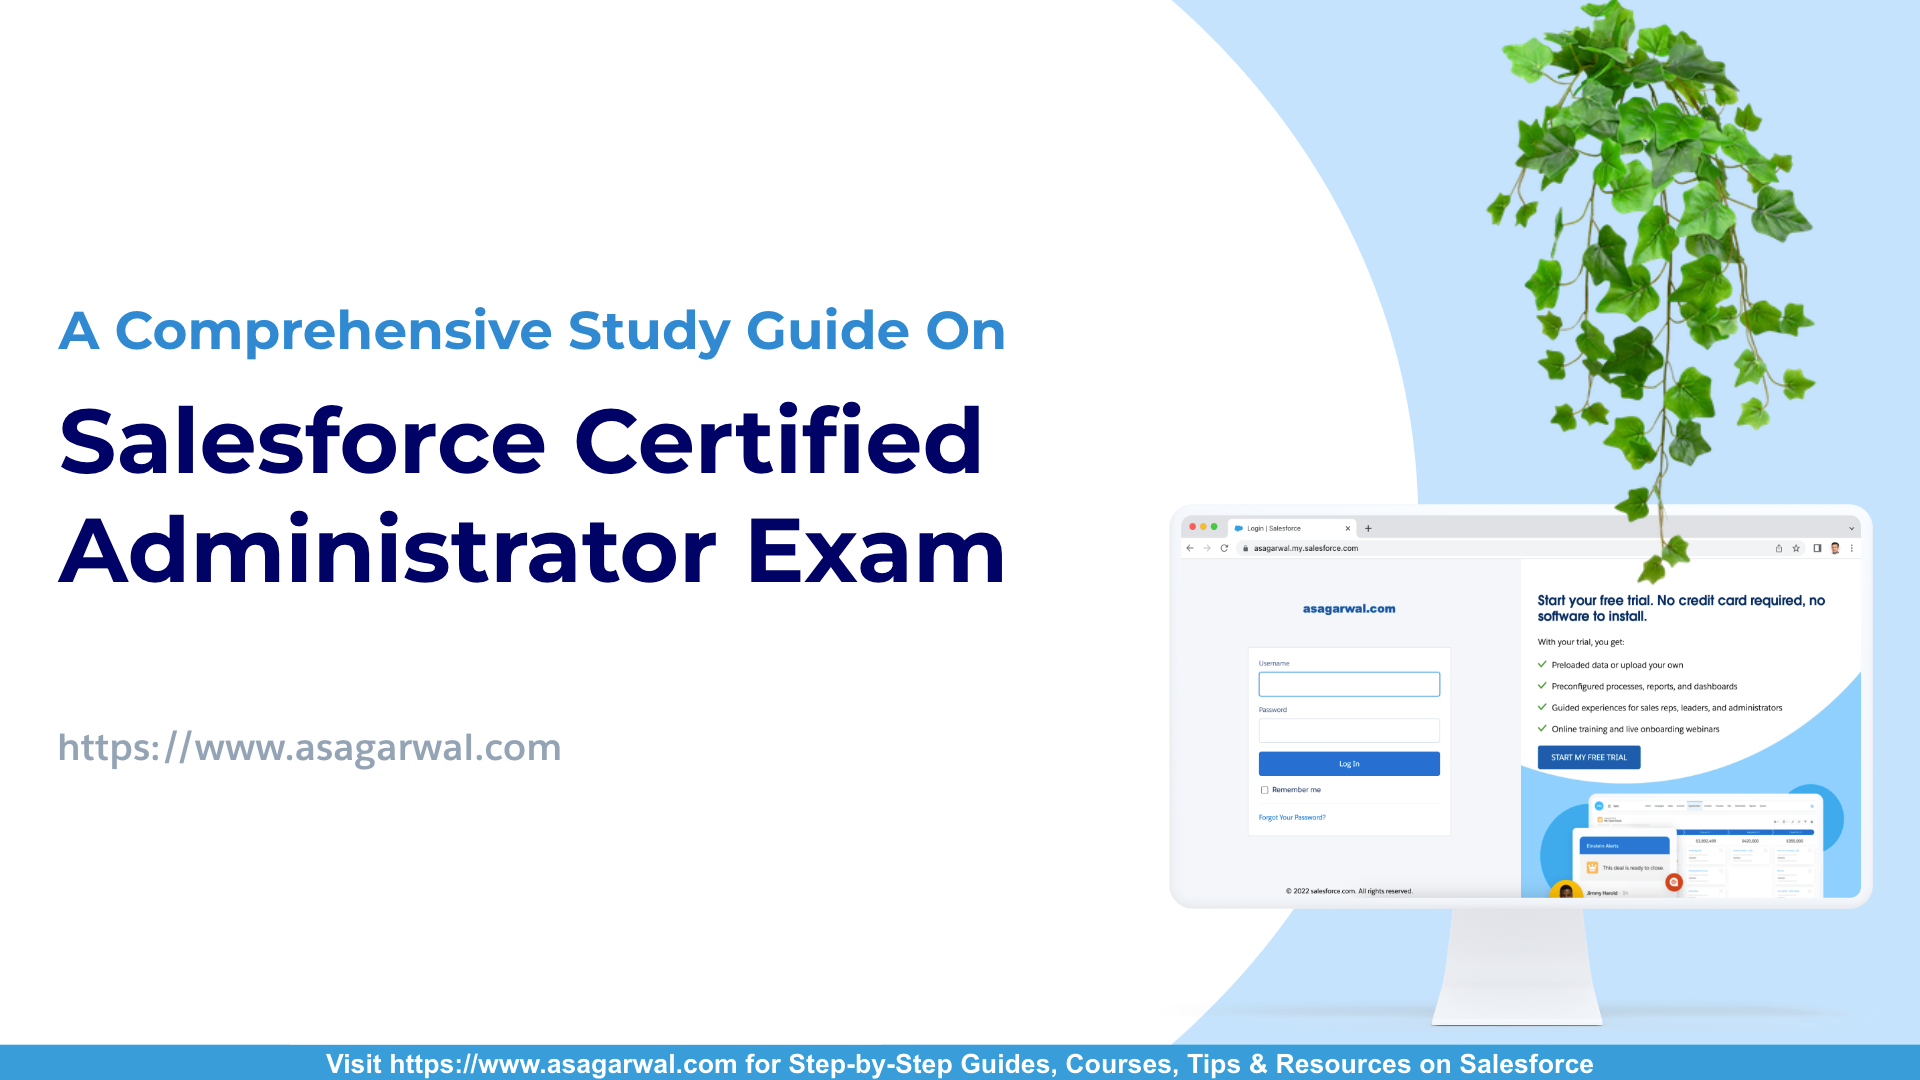 A Comprehensive Study Guide On Salesforce Certified Administrator Exam